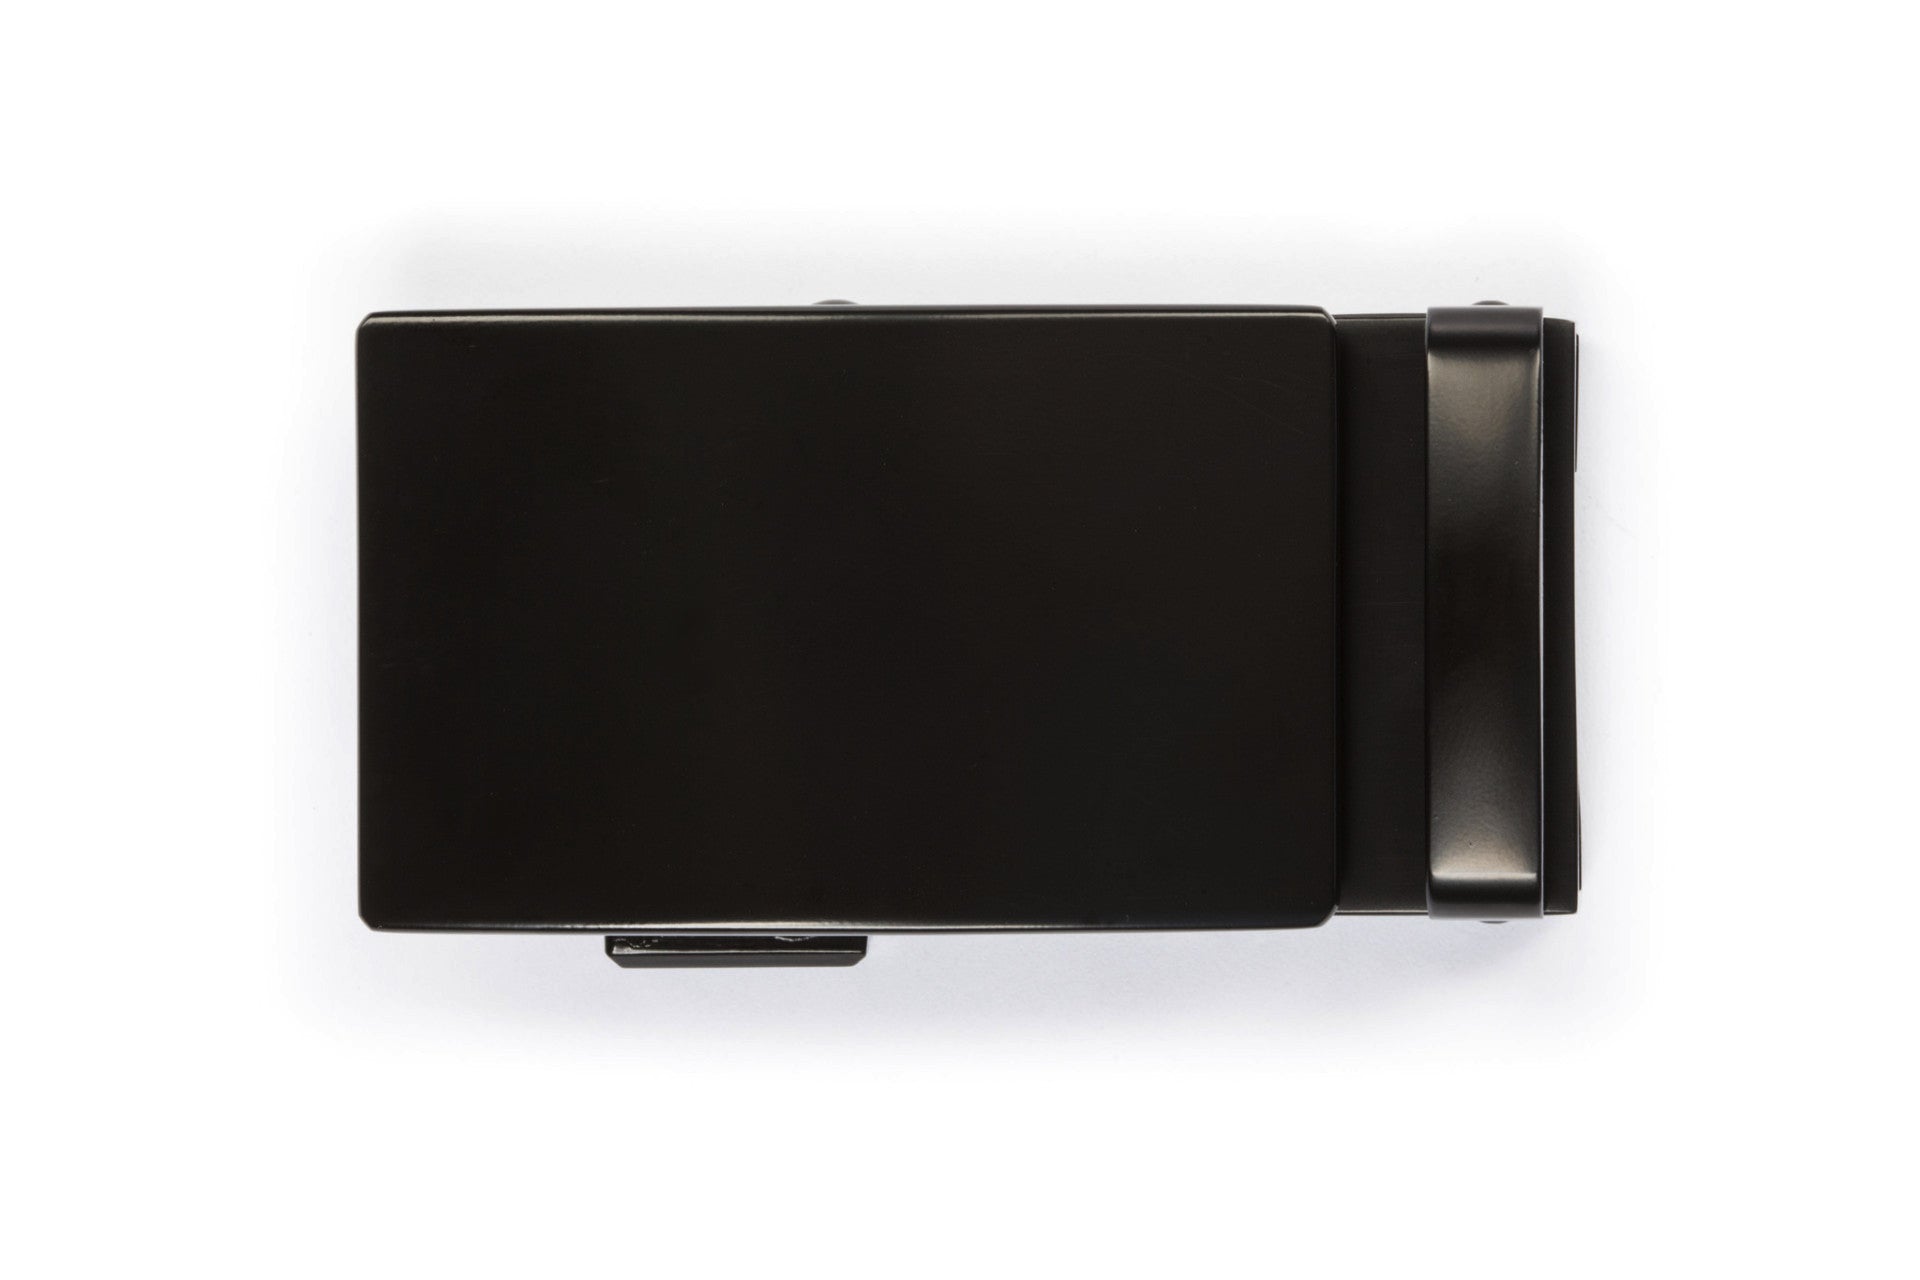 Men's classic ratchet belt buckle in black with a width of 1.5 inches, top view.